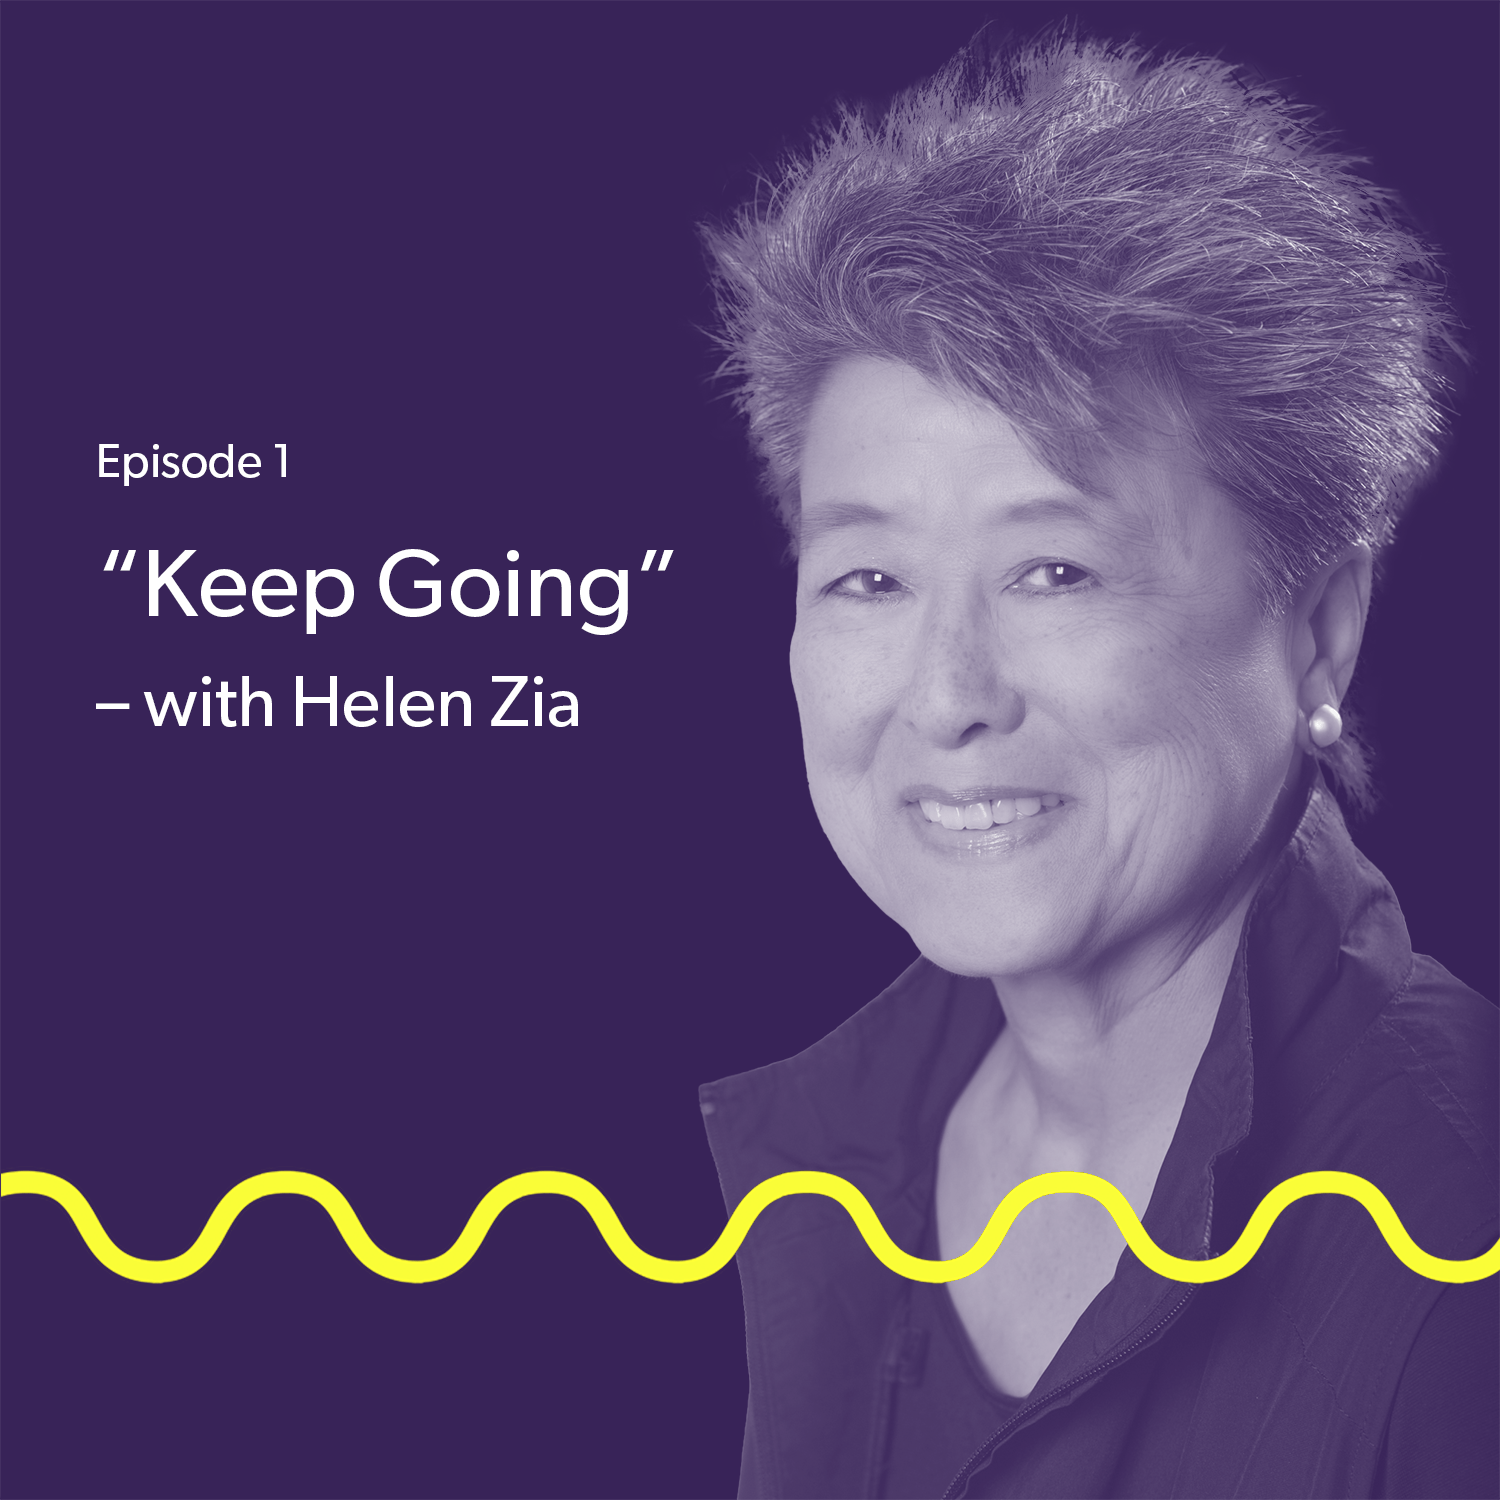 portrait of Helen Zia on dark purple background with yellow waveform and text that reads Episode 1 "Keeping Going" - with Helen Zia